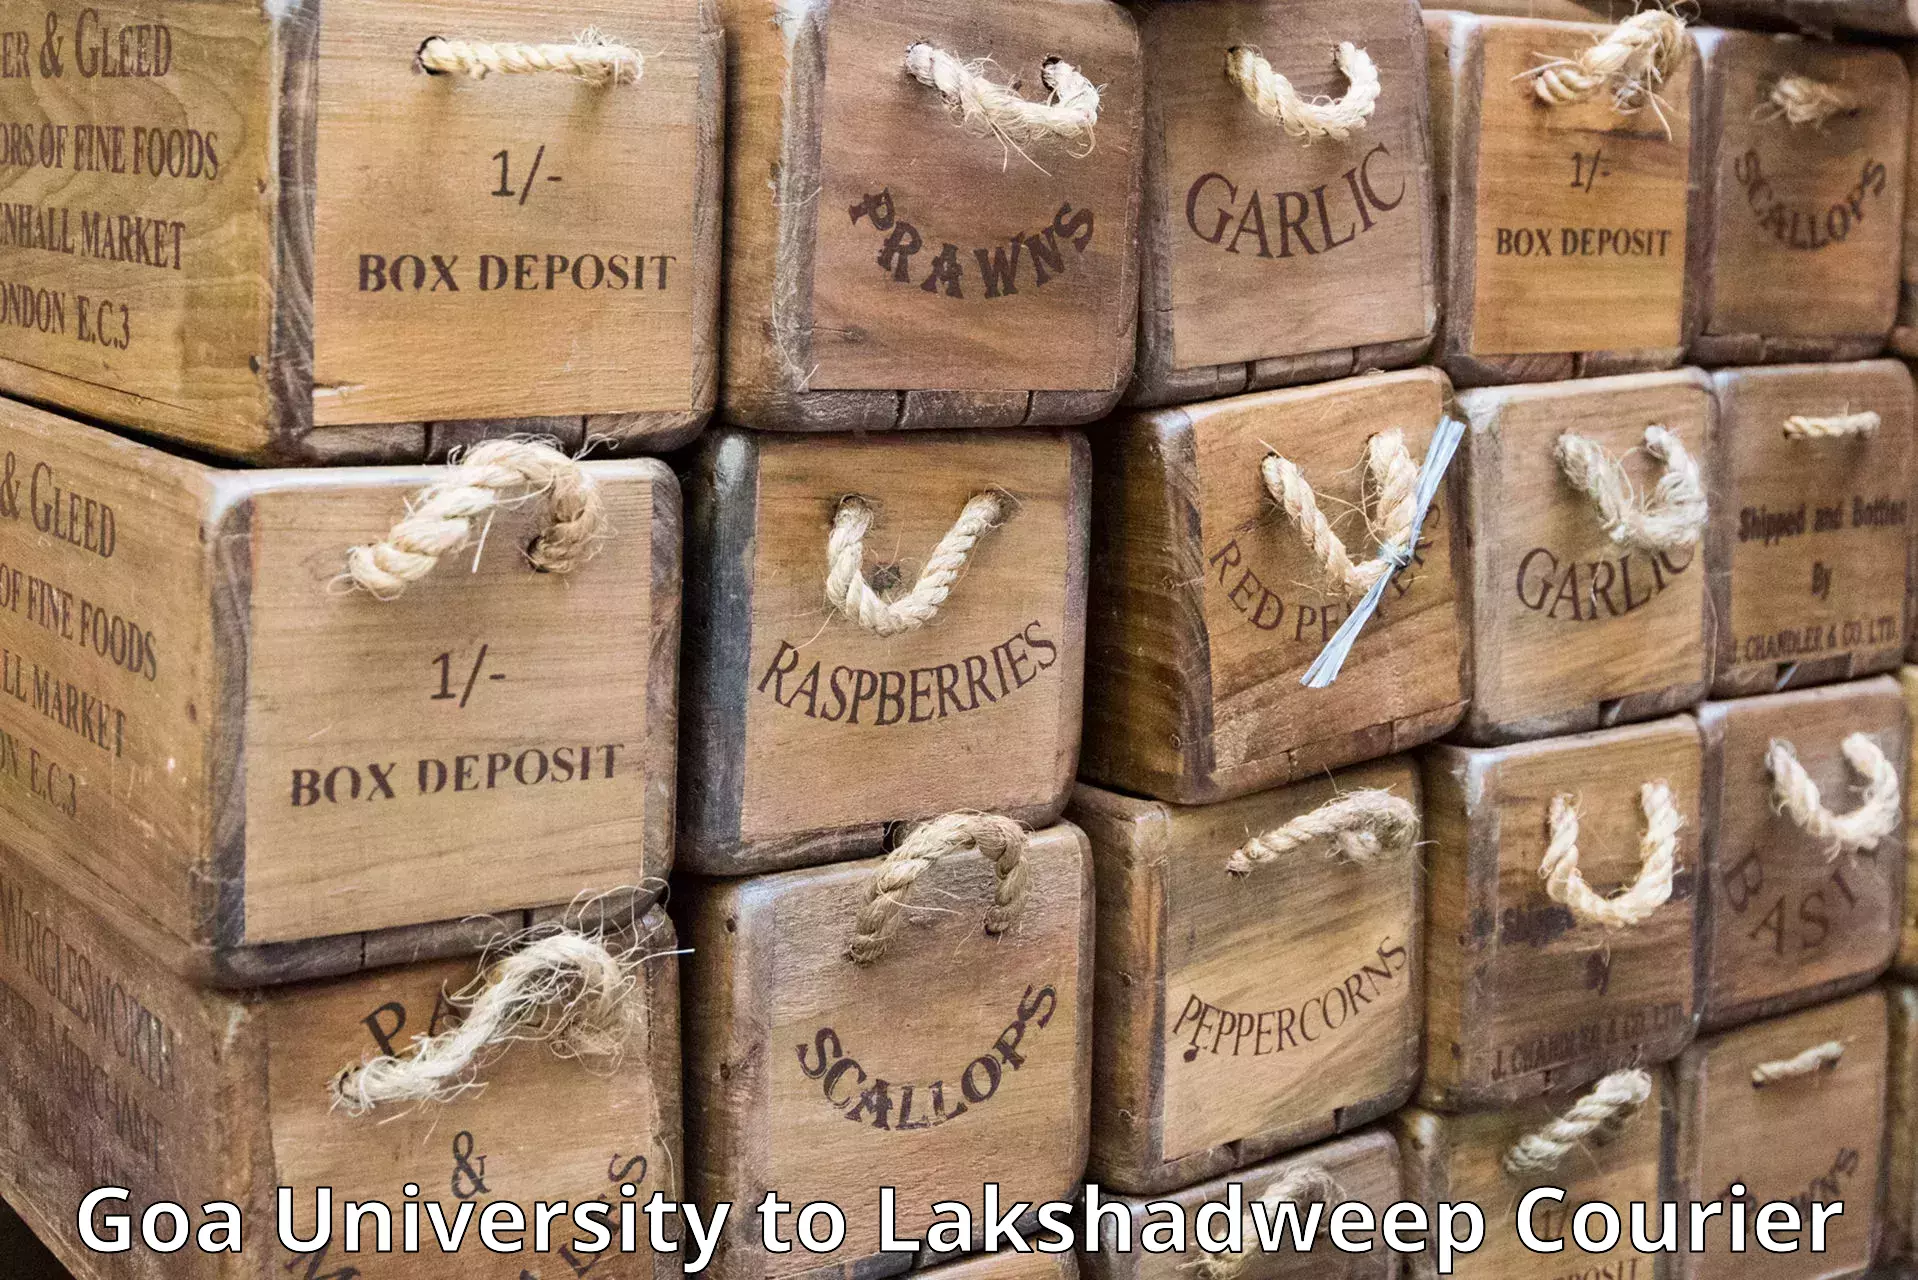 Efficient parcel delivery Goa University to Lakshadweep